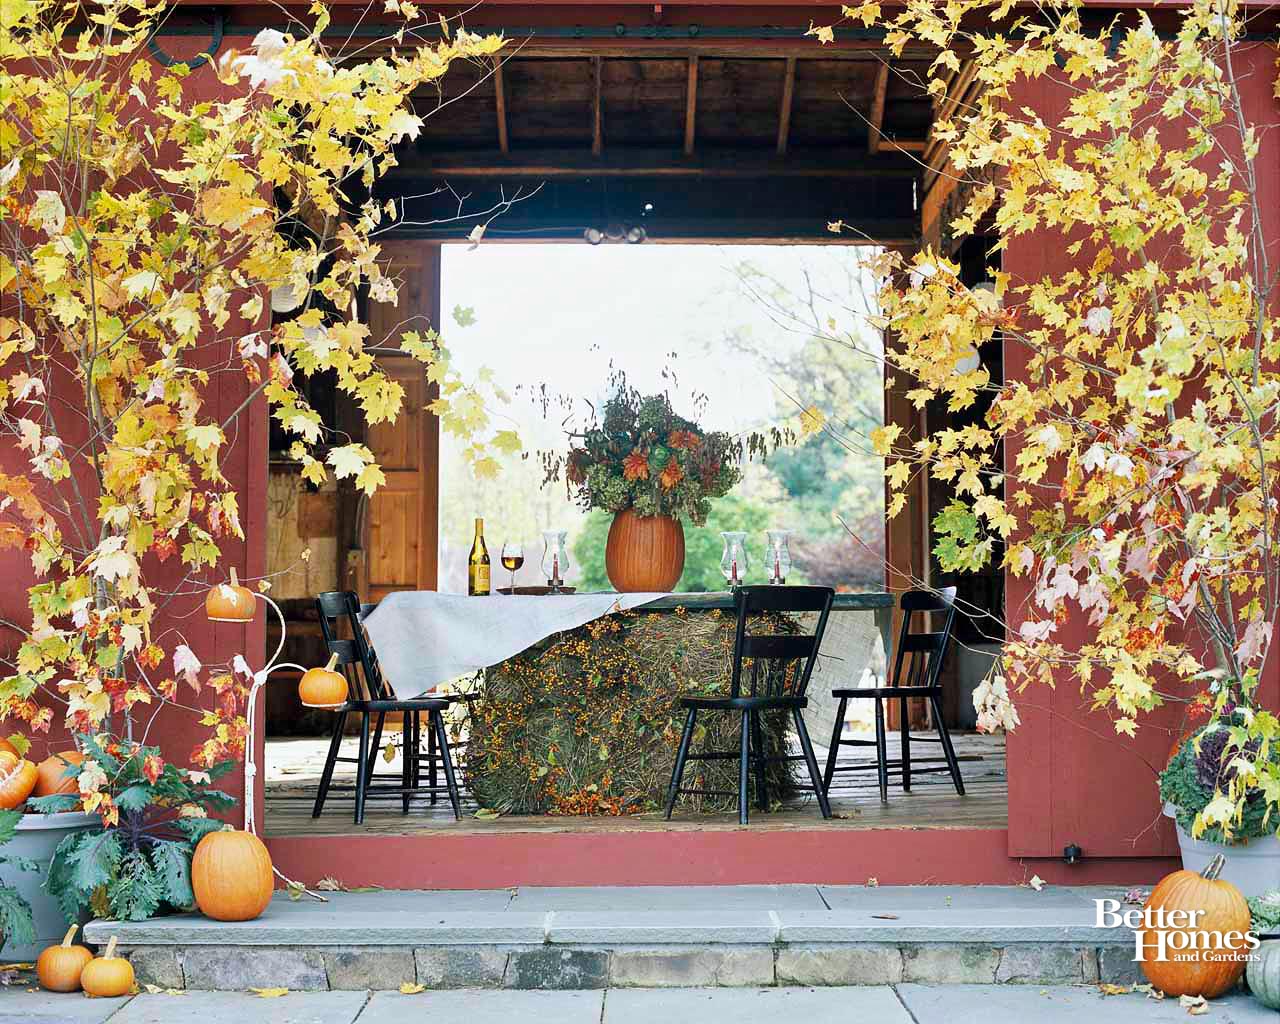 Outdoors Fall Screensavers | The Best home